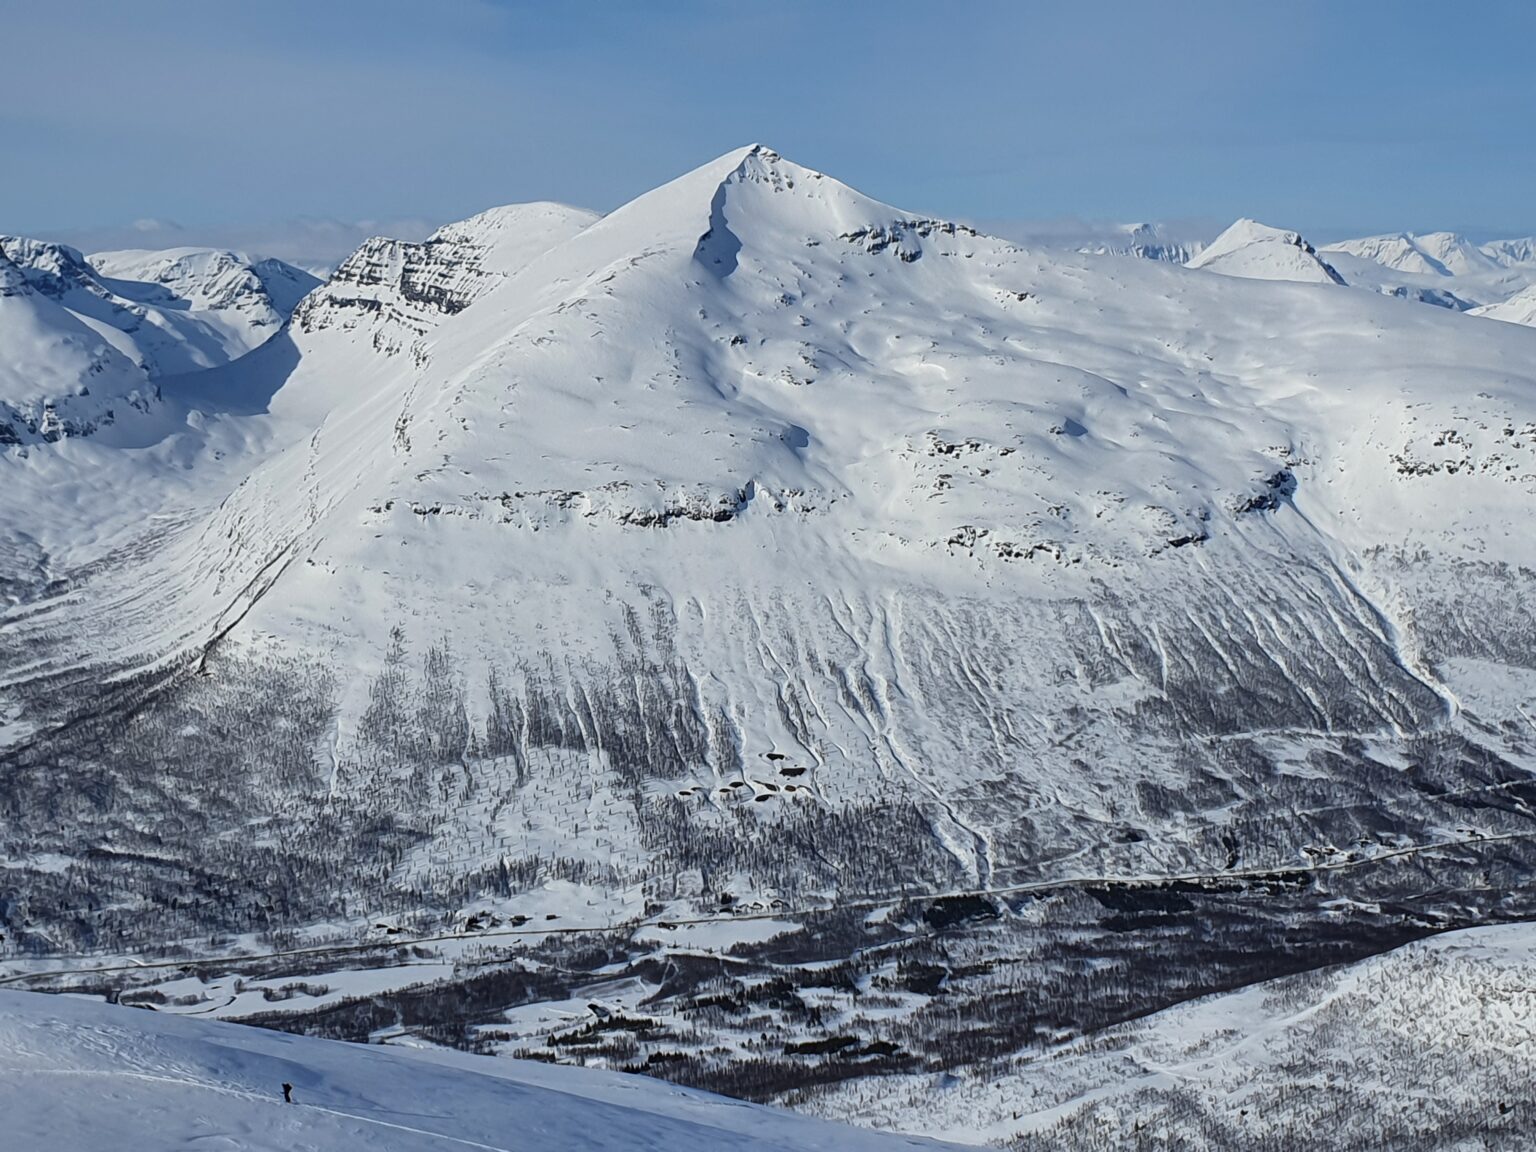 Looking at the South face of Blåbaerfjellet from the slopes above Tamok Husset